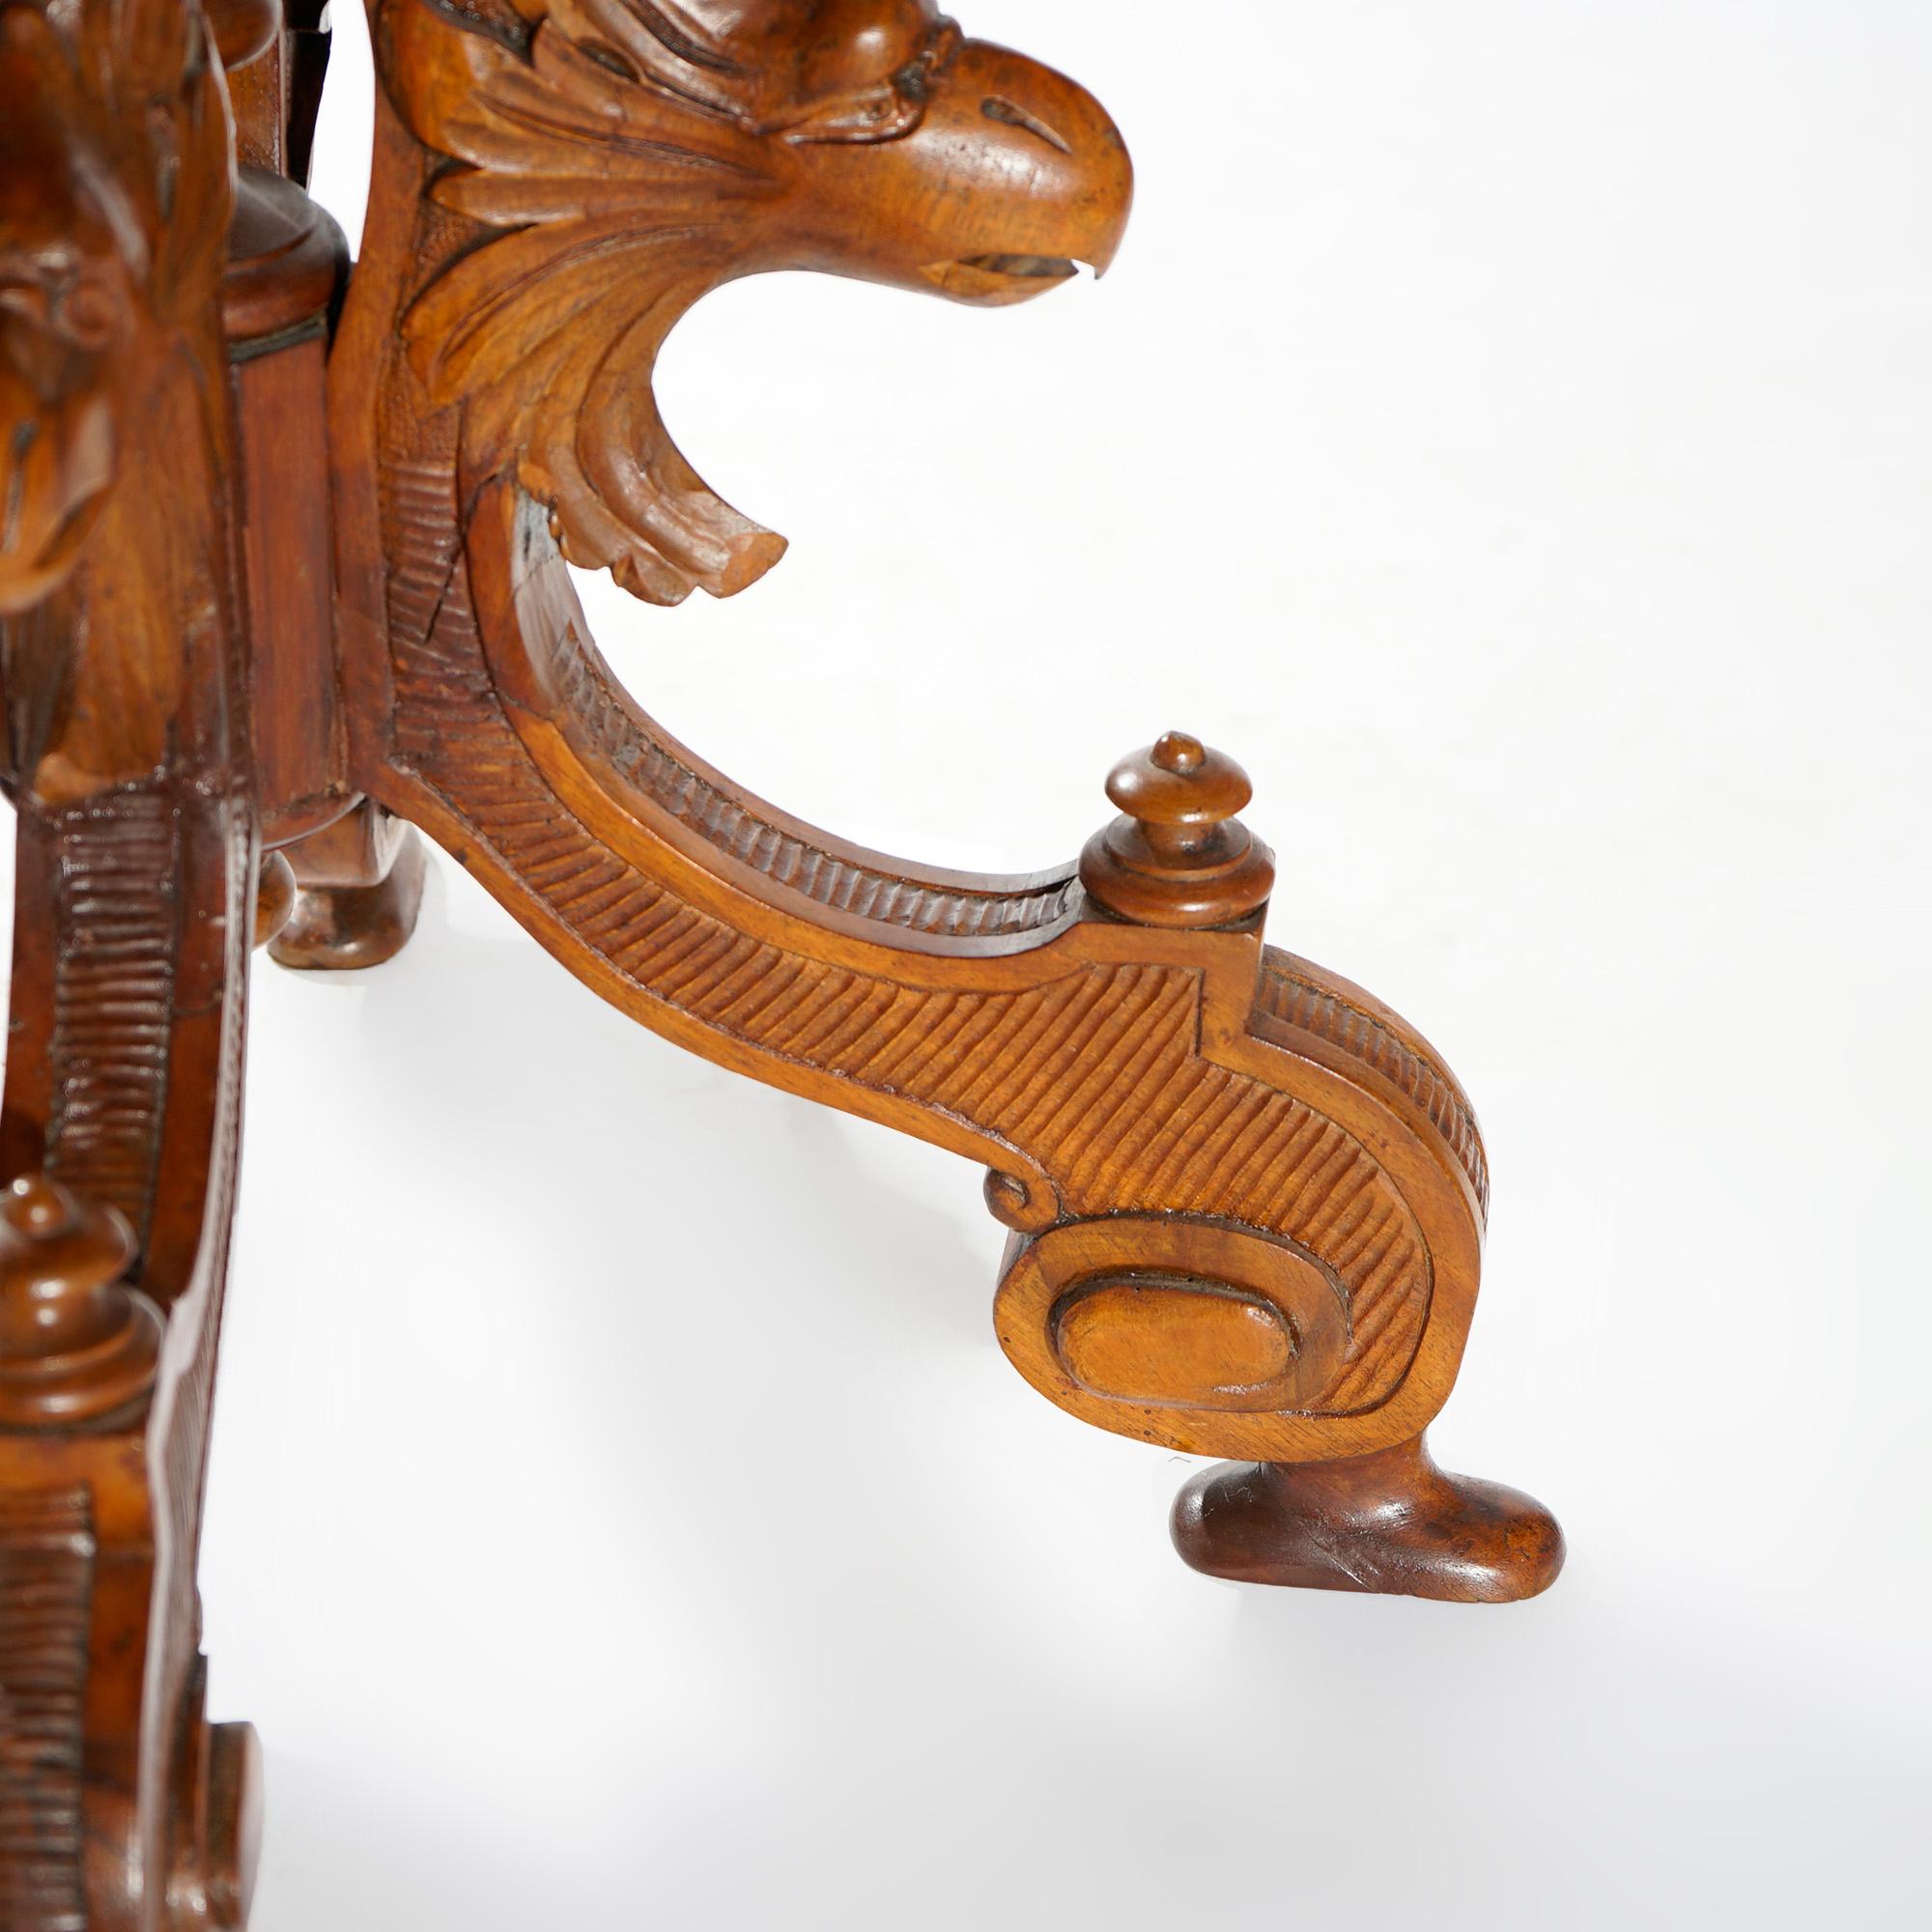 Antique Classical Marquetry Inlaid & Figural Carved Kingwood Center Table 19th C For Sale 11